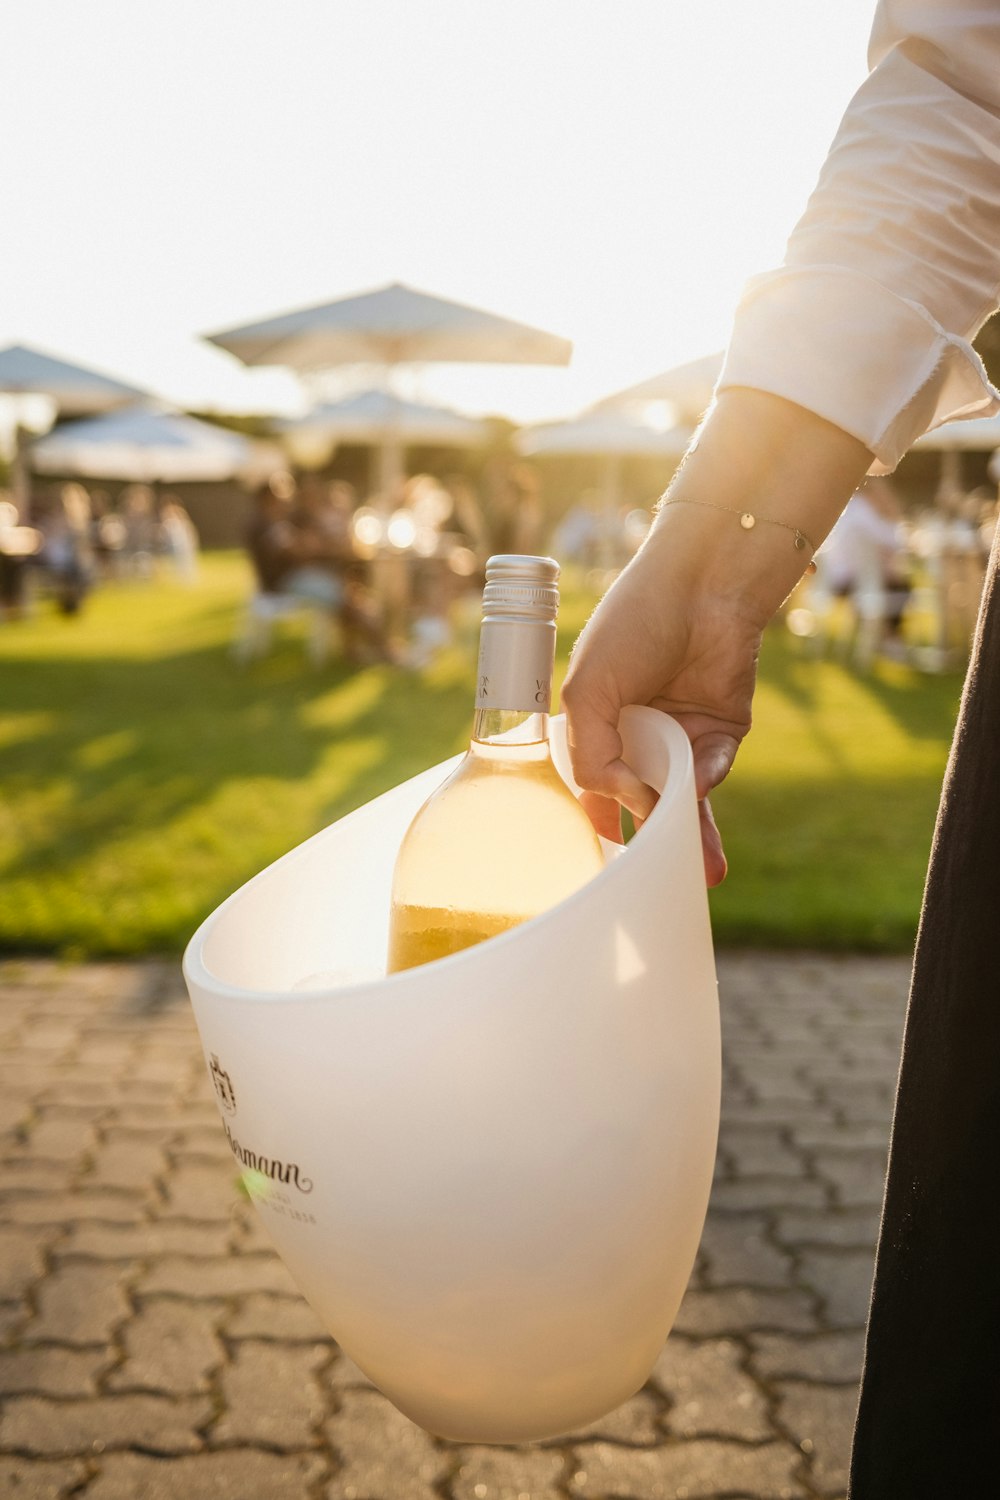 a person holding a bottle of wine in a bag